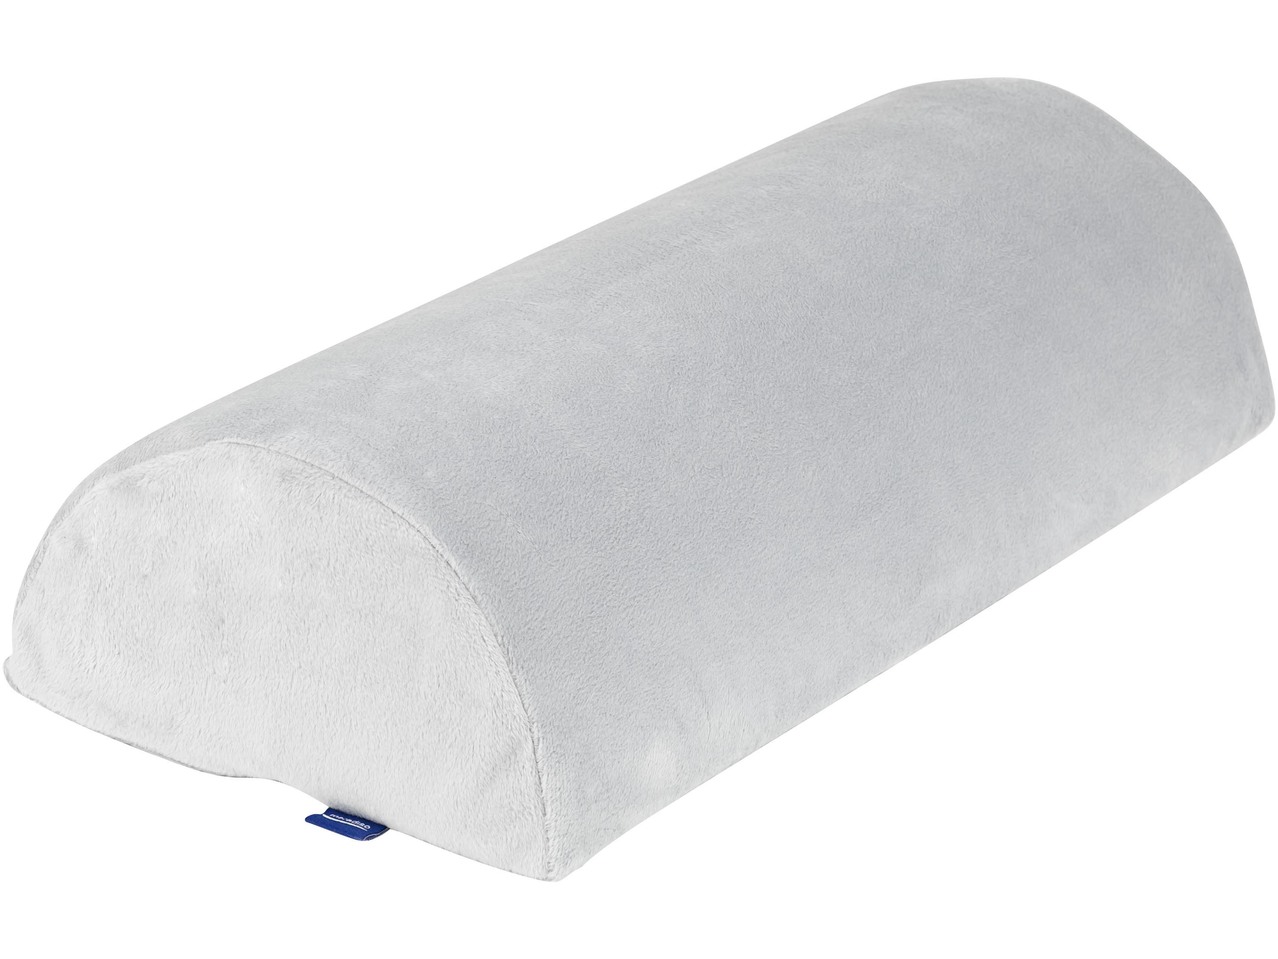 Half Roll or Neck Support Cushion